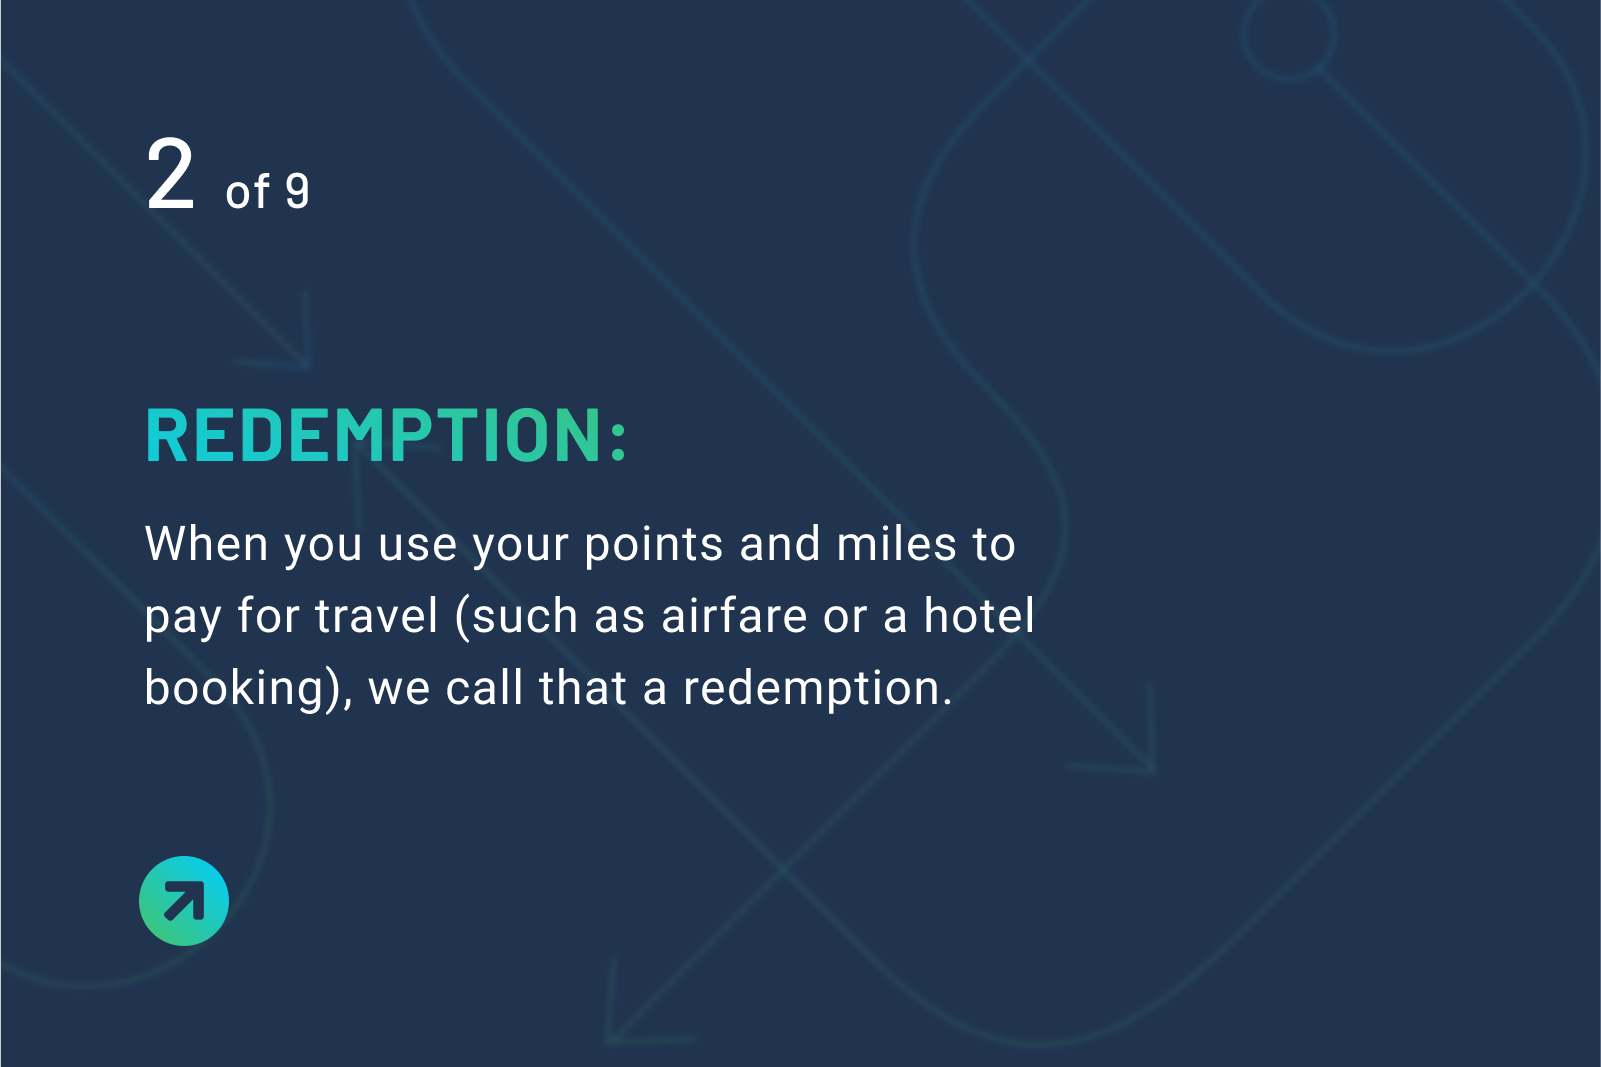 Redemption definition: When you use your points and miles to pay for travel (such as airfare or a hotel booking), we call that a redemption.